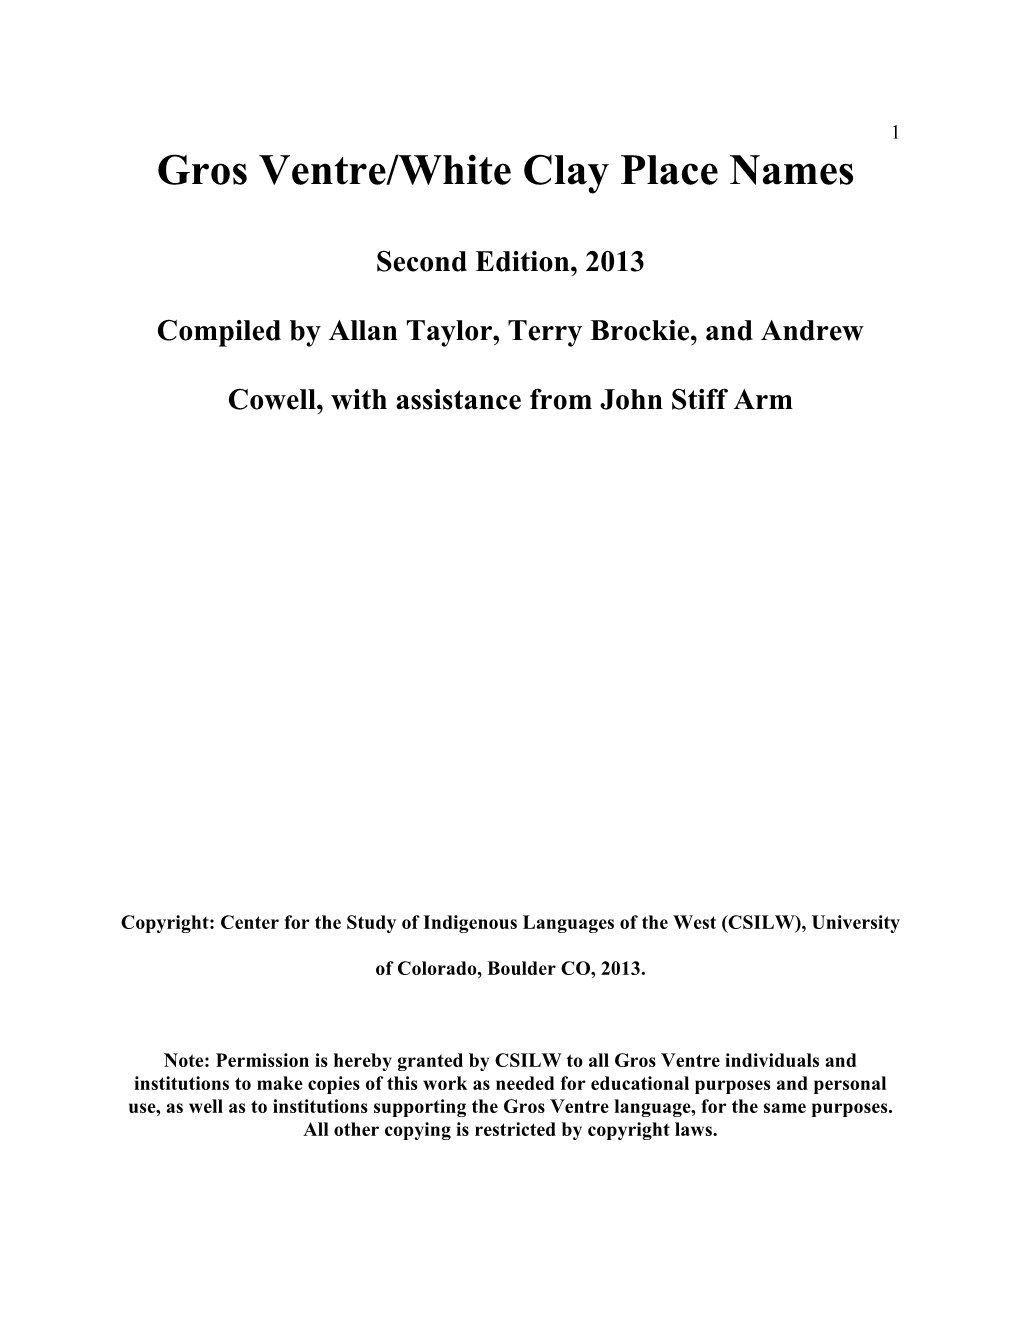 Gros Ventre/White Clay Place Names